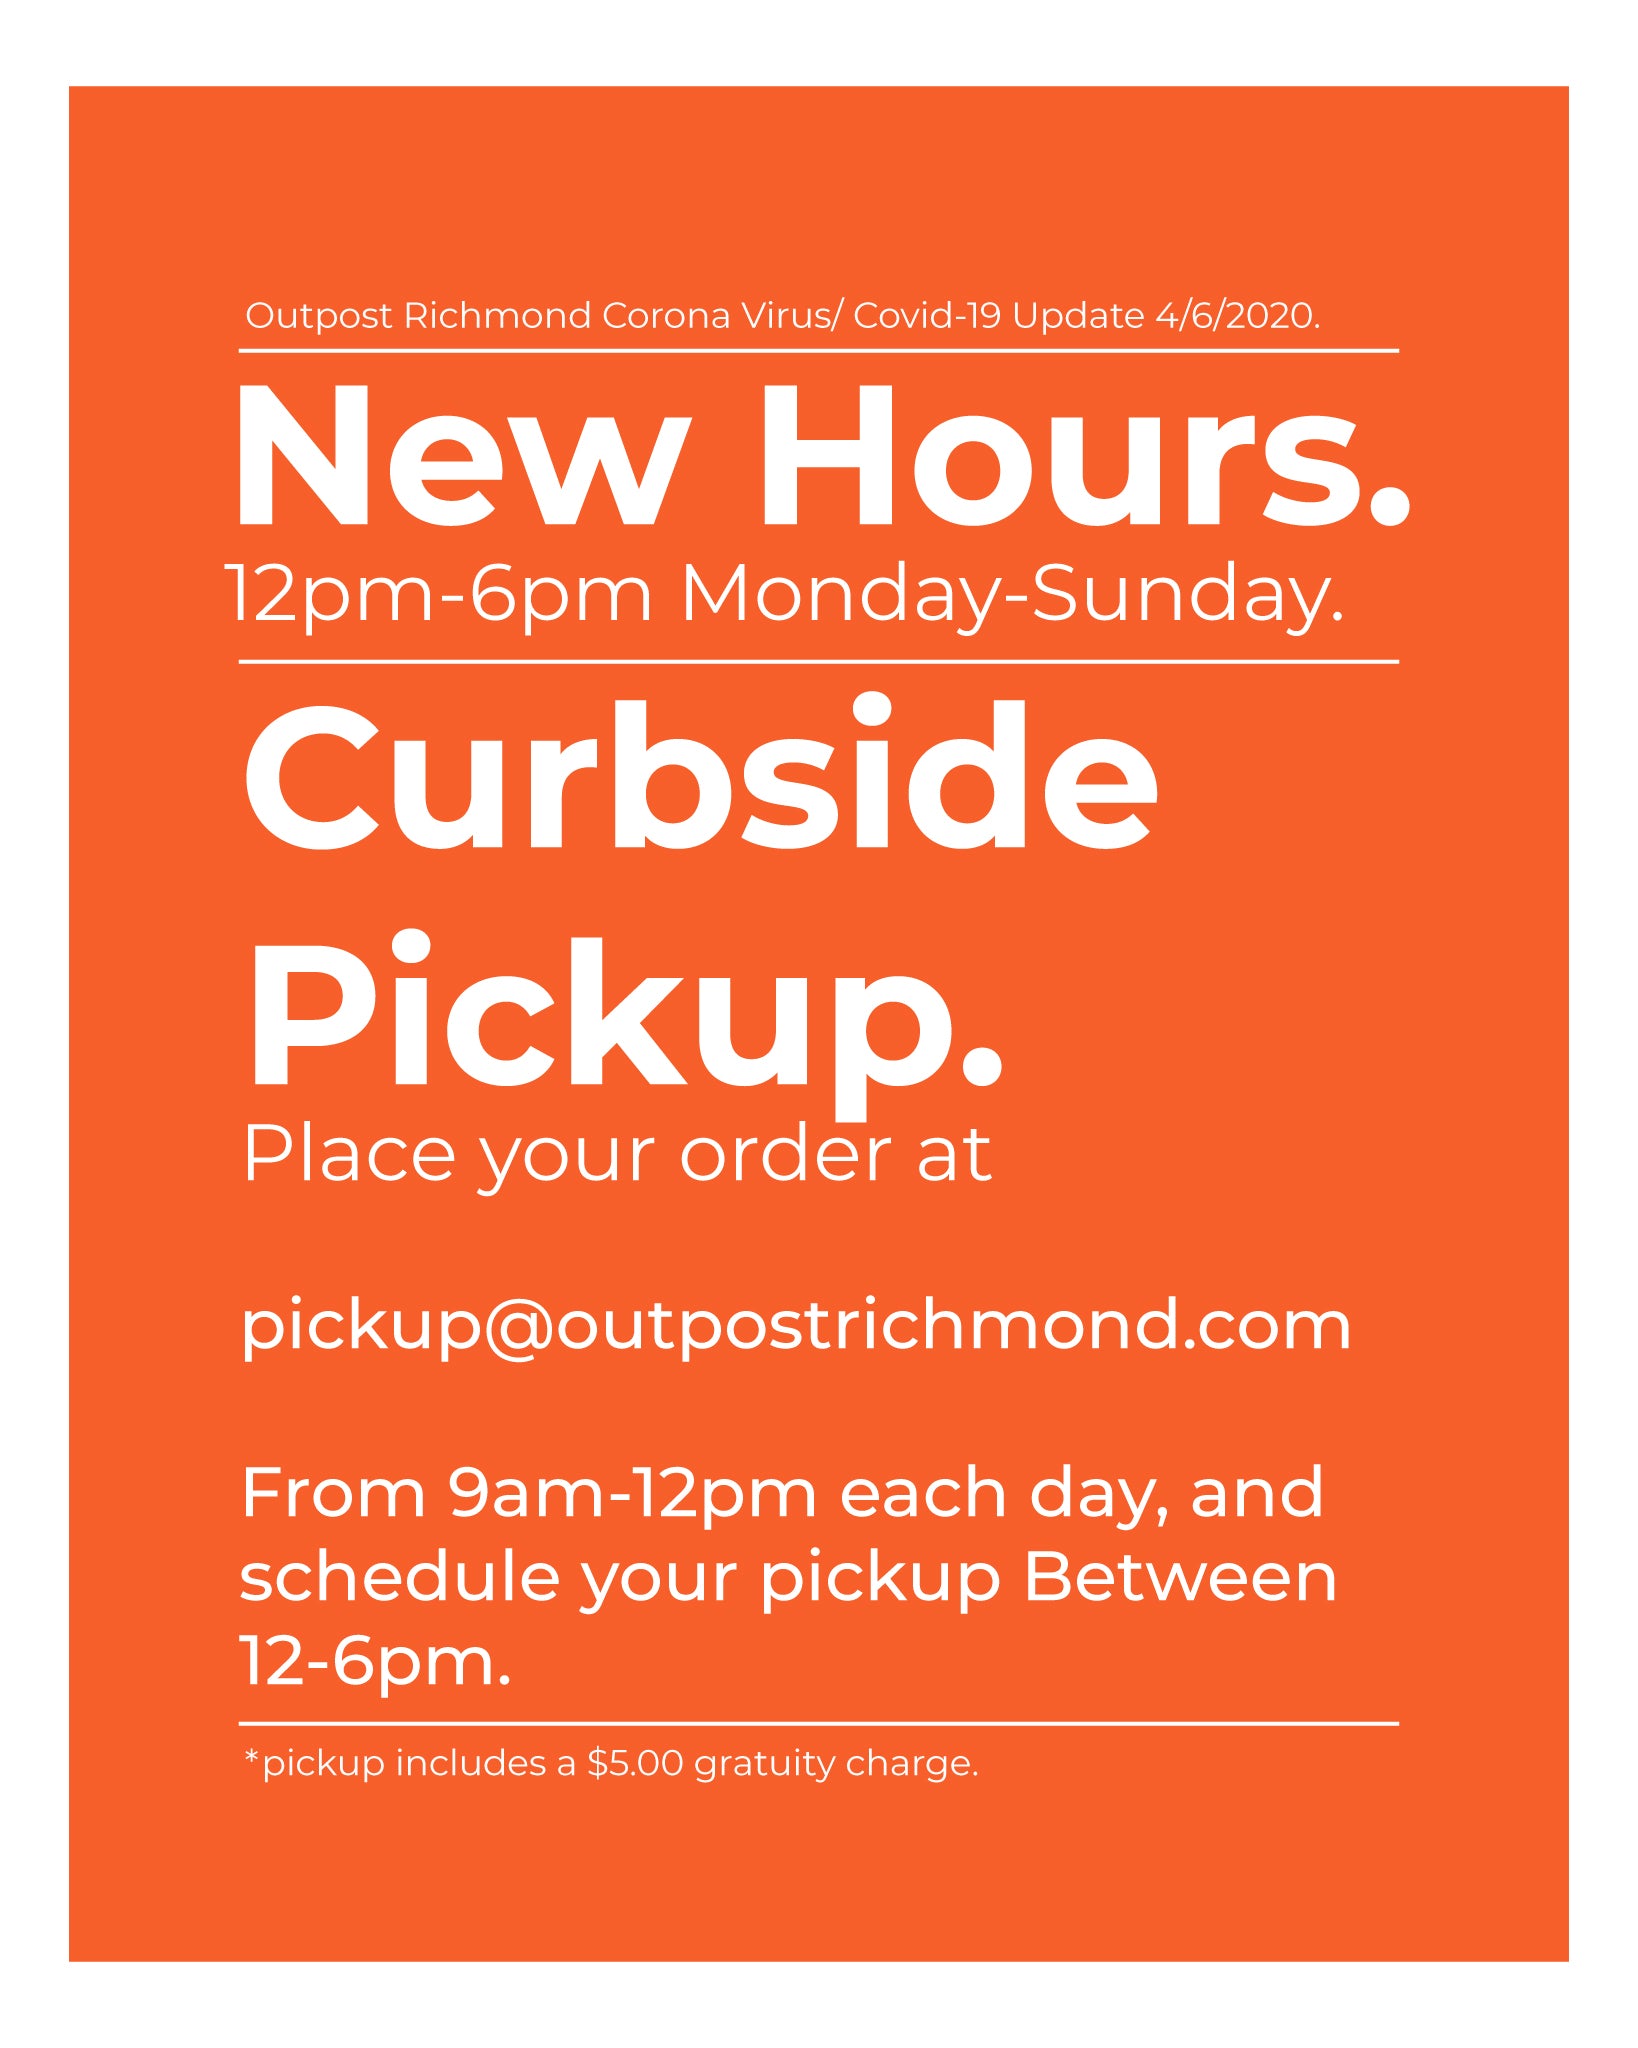 New Hours, Curbside Pickup, 